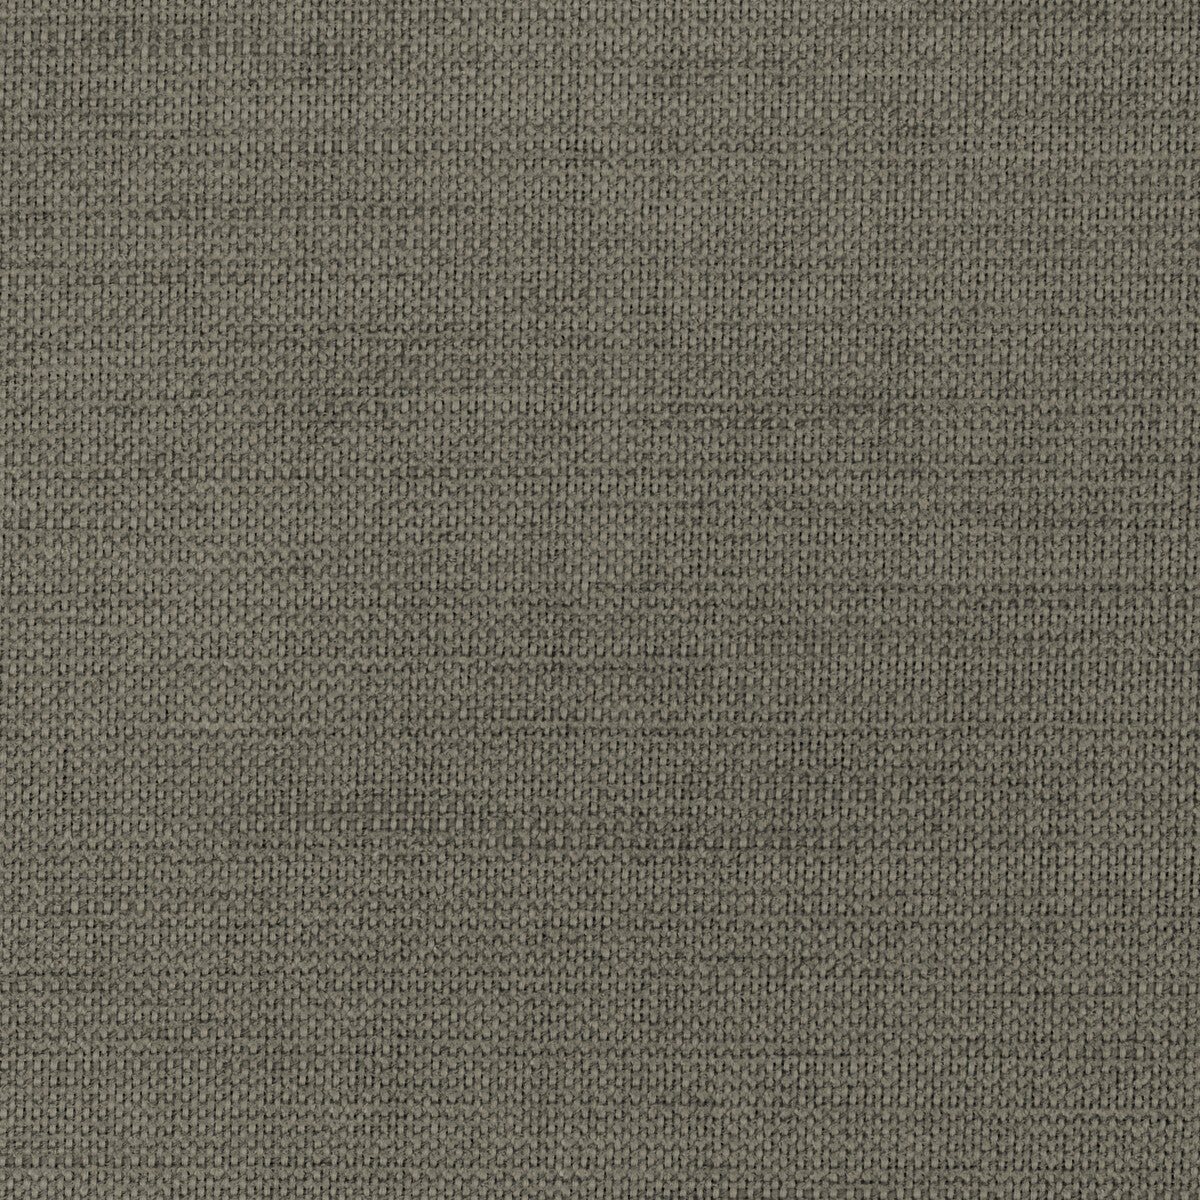 Kravet Smart fabric in 36302-21 color - pattern 36302.21.0 - by Kravet Smart in the Performance Crypton Home collection